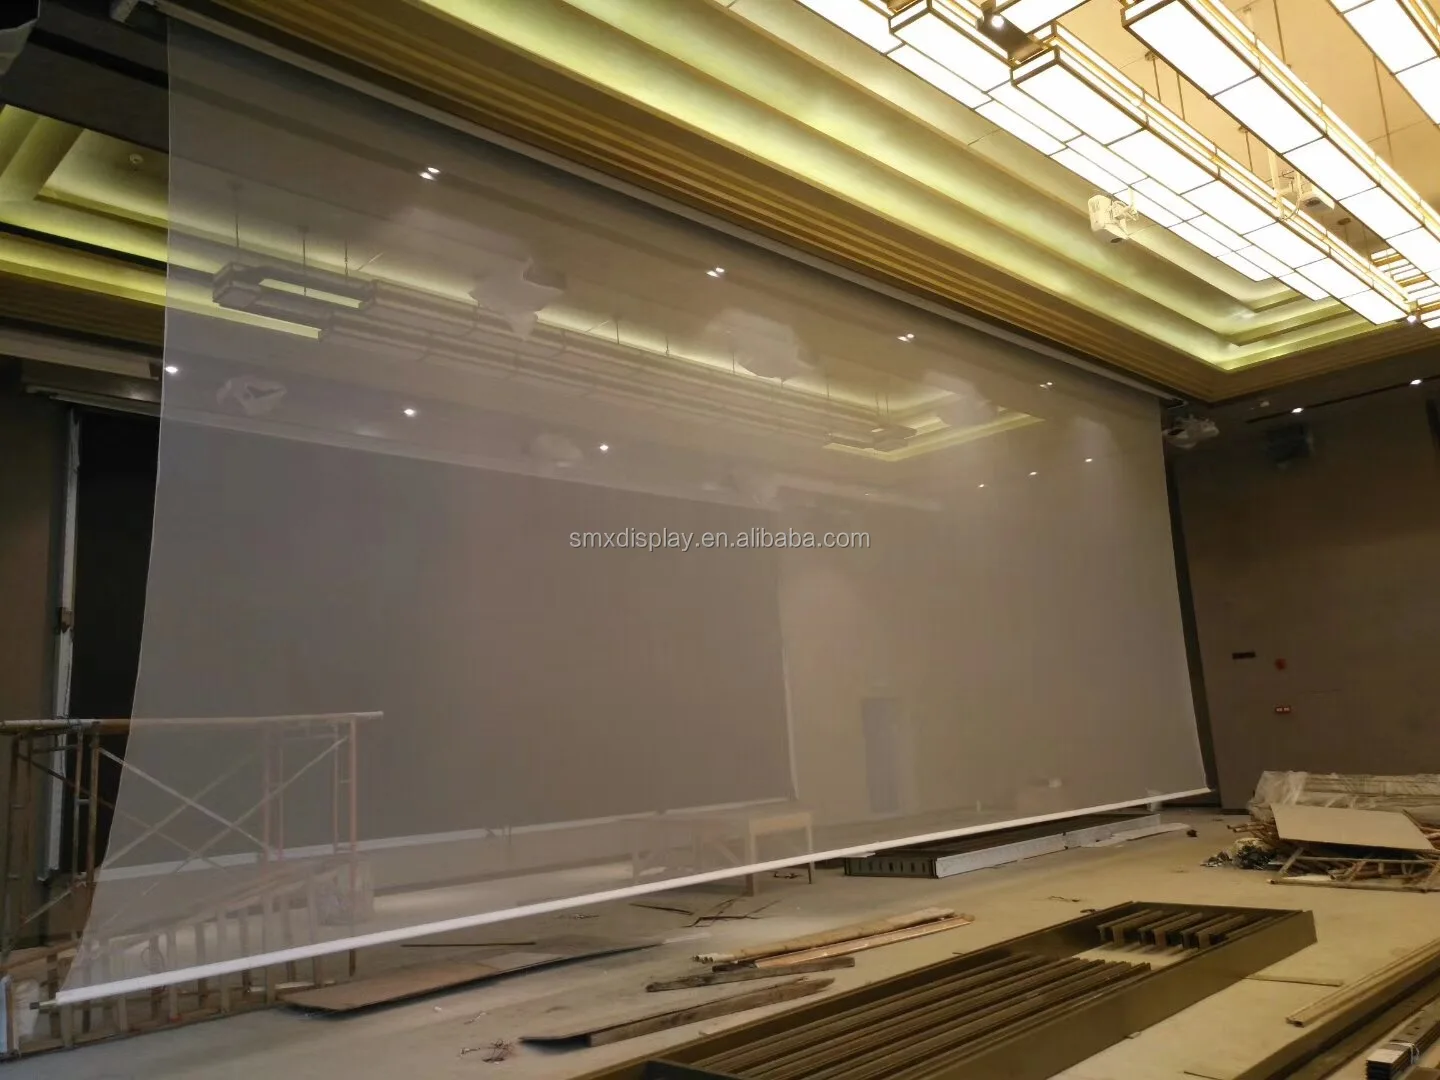 Hd Holographic Projection Screen Is A Stage Art Curtain,Often Used In